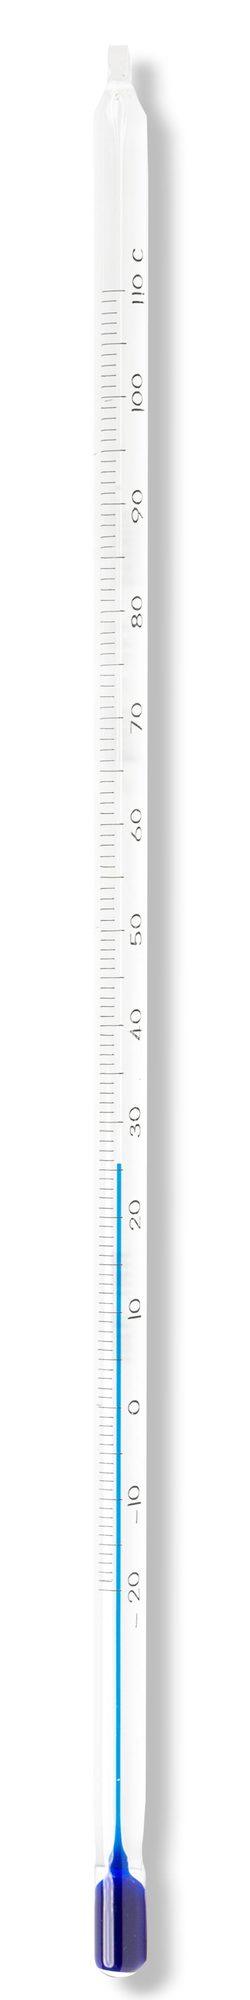 Serialized Glass Thermometers from VEE GEE Scientific